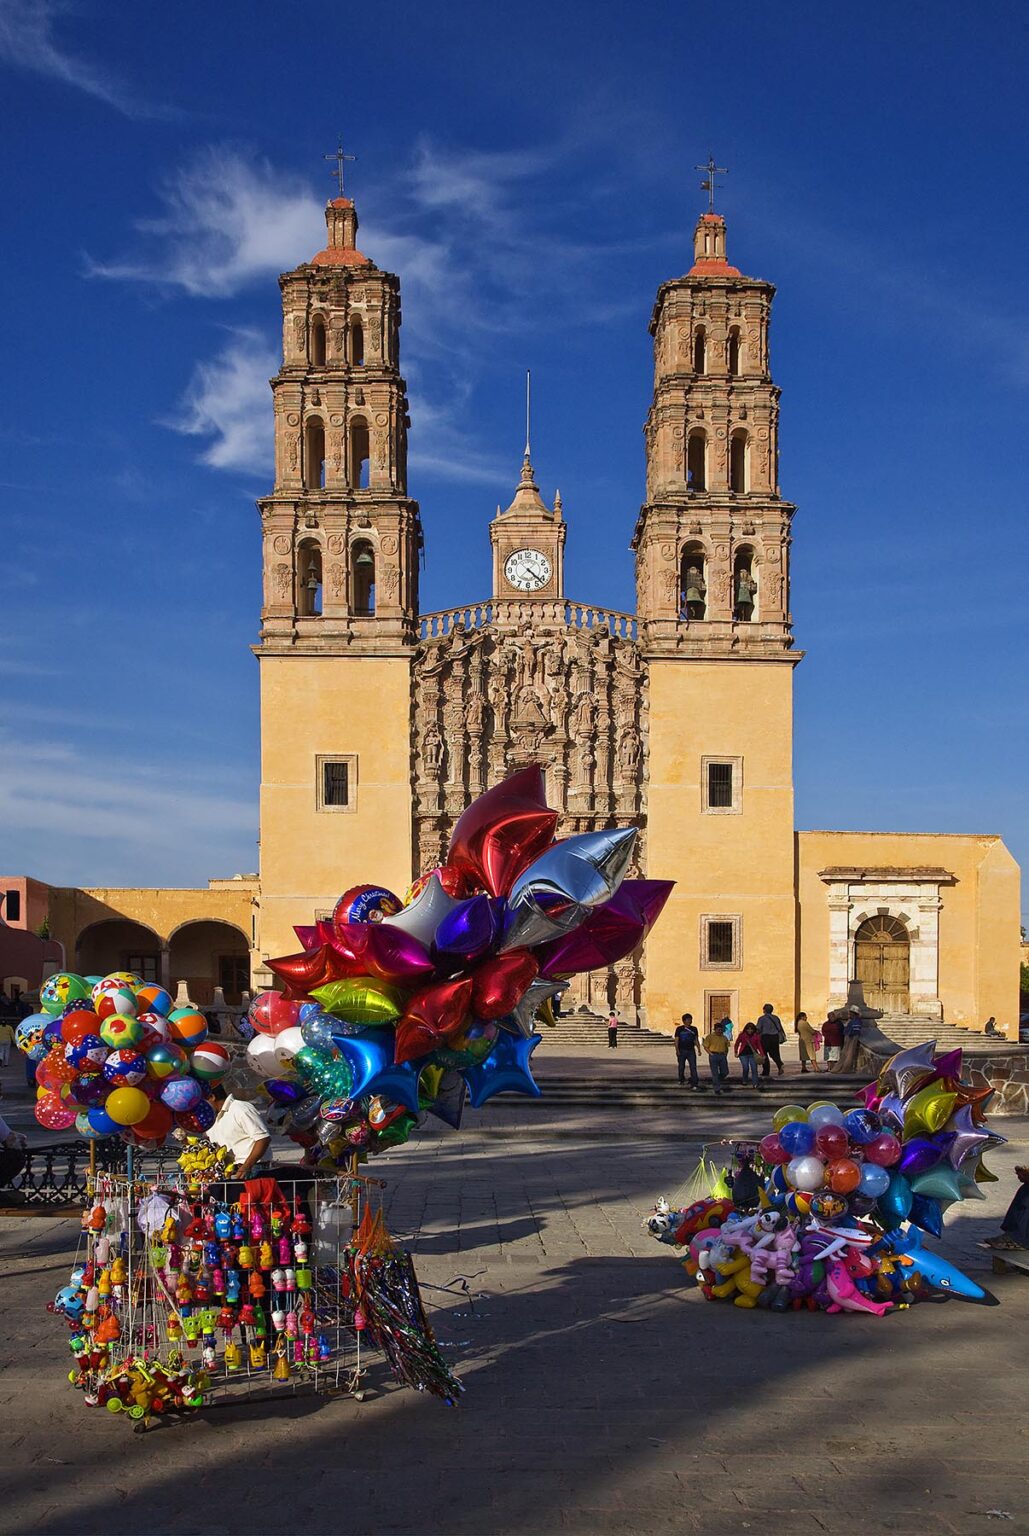 BALLOONS are sold in front of the DOLORES HIDALGO CATHEDRAL built in the 16th century - GUANAJUATO, MEXICO